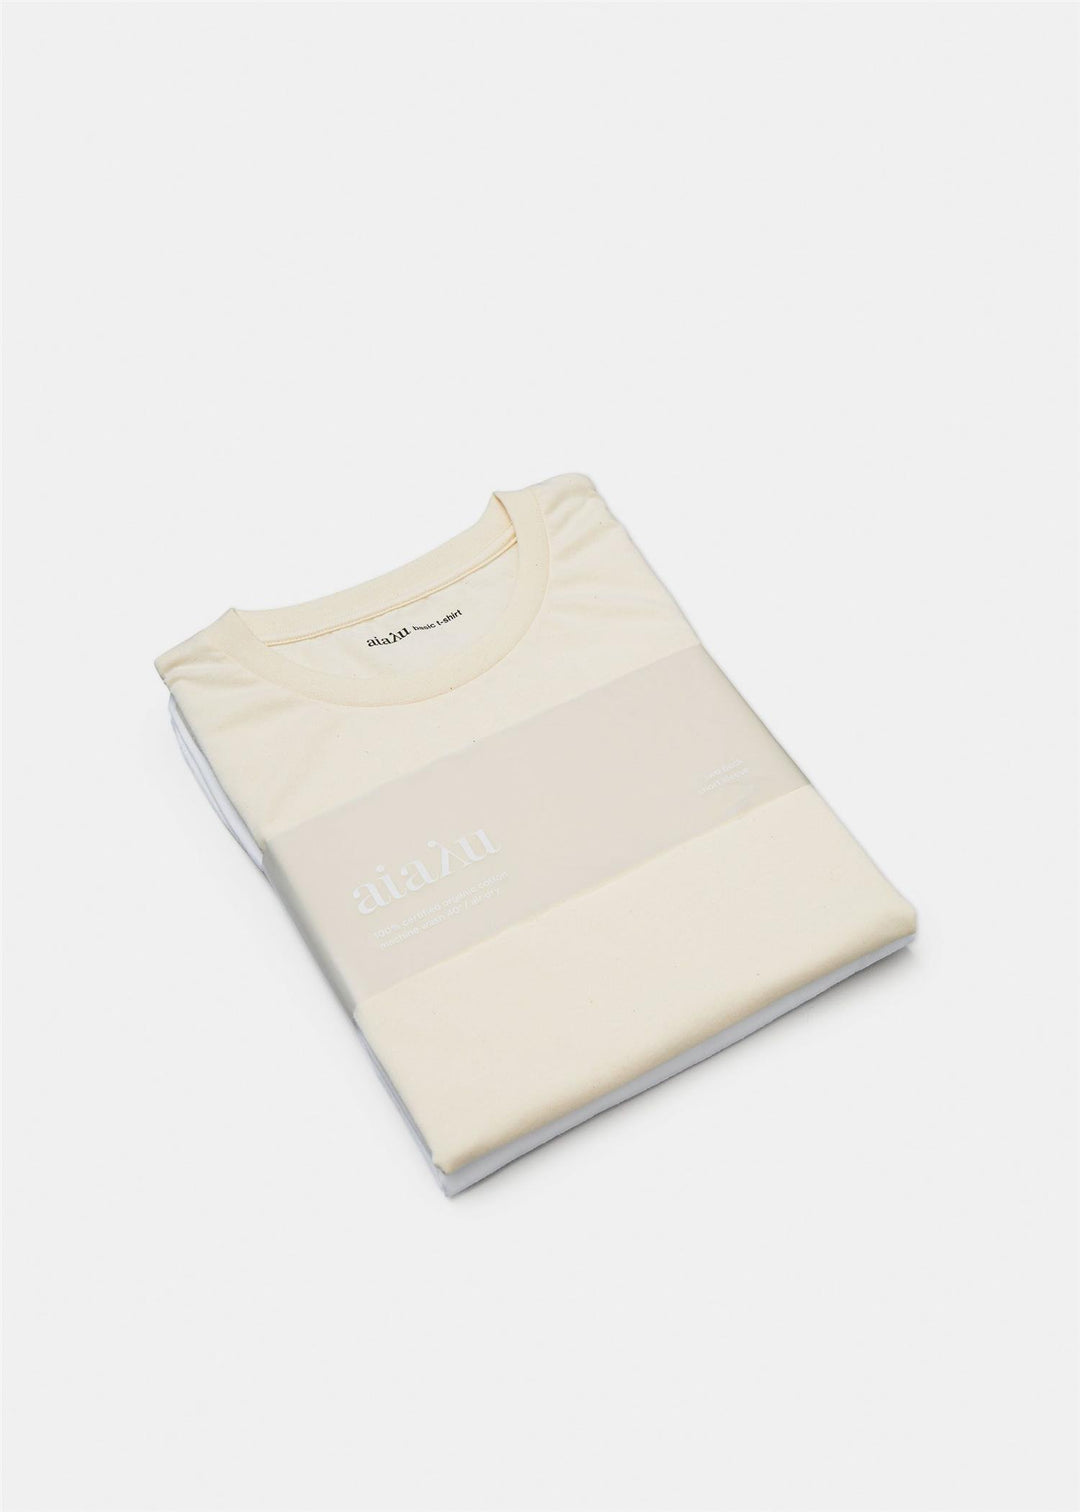 Aiayu - Short Sleeve Two Pack